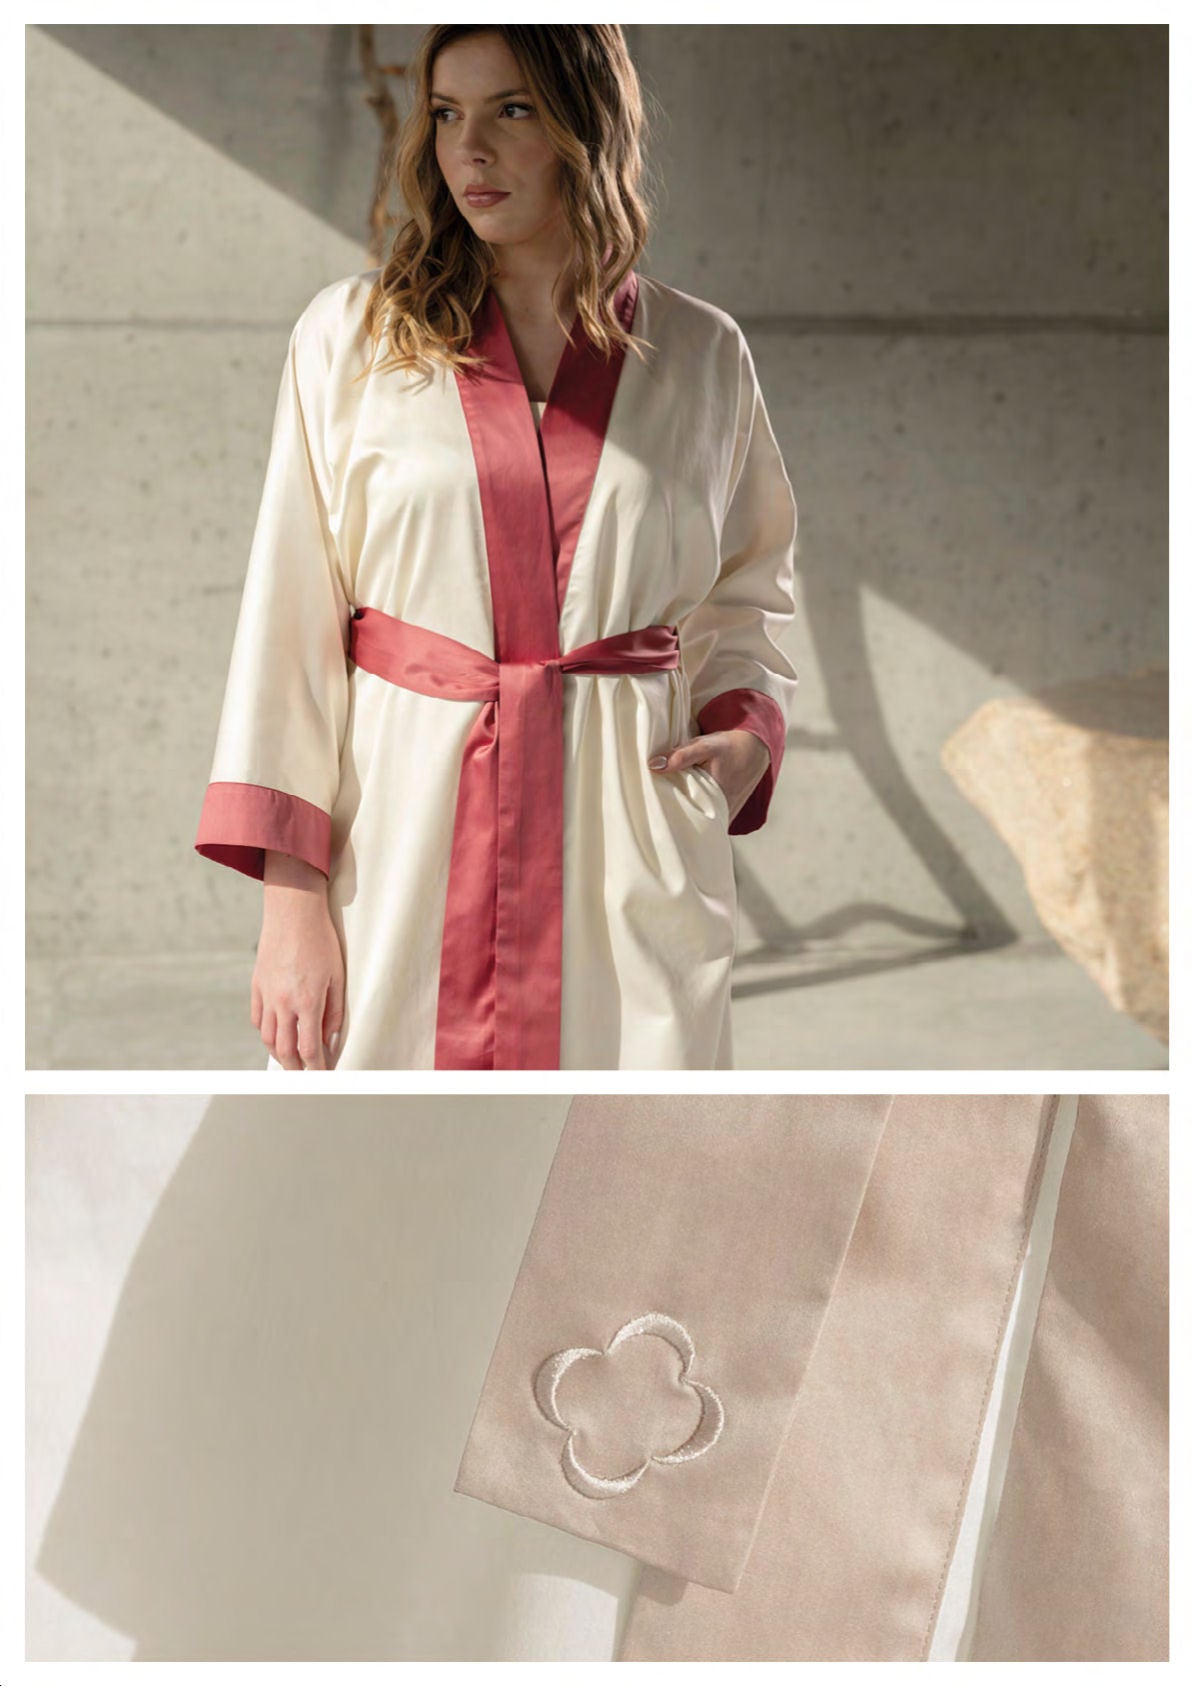 MARY Egyptian Cotton Housecoat by Celso de Lemos - |VESIMI Design| Luxury Bathrooms and Home Decor